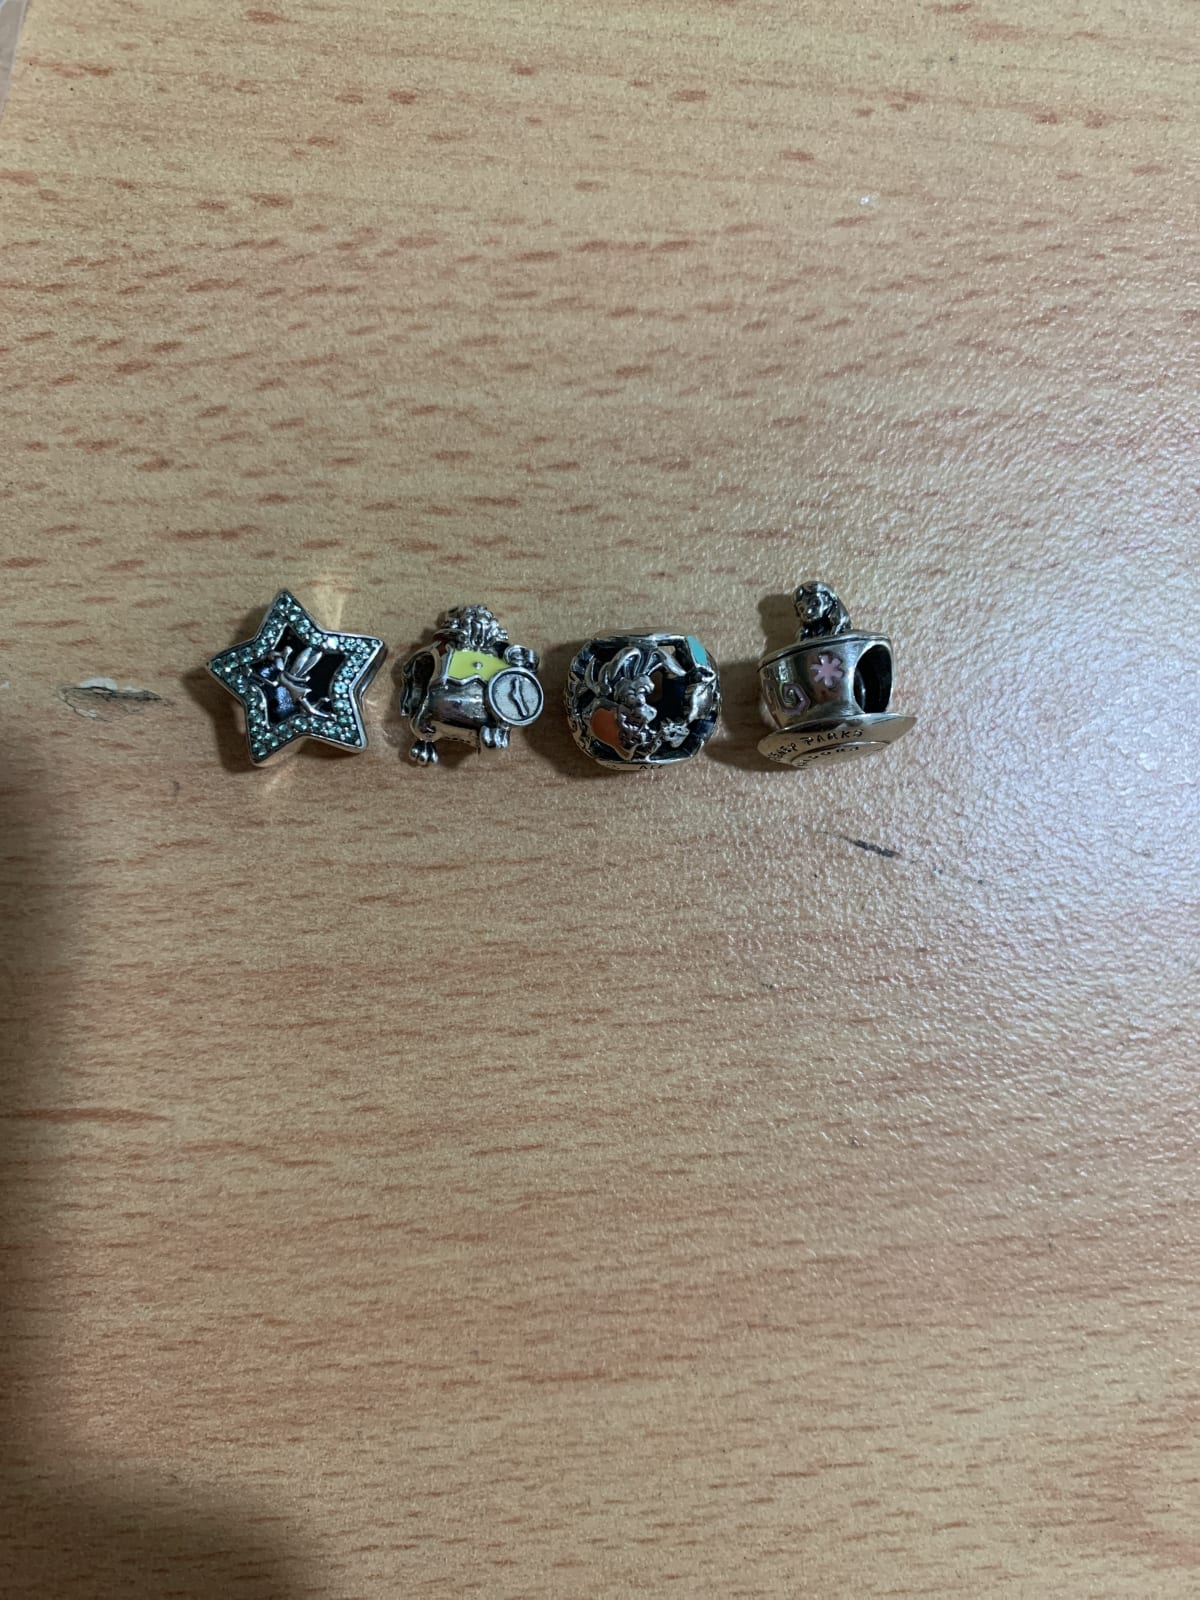 Bought these second hand Pandora Beads from Xianyu, China’s version of ...